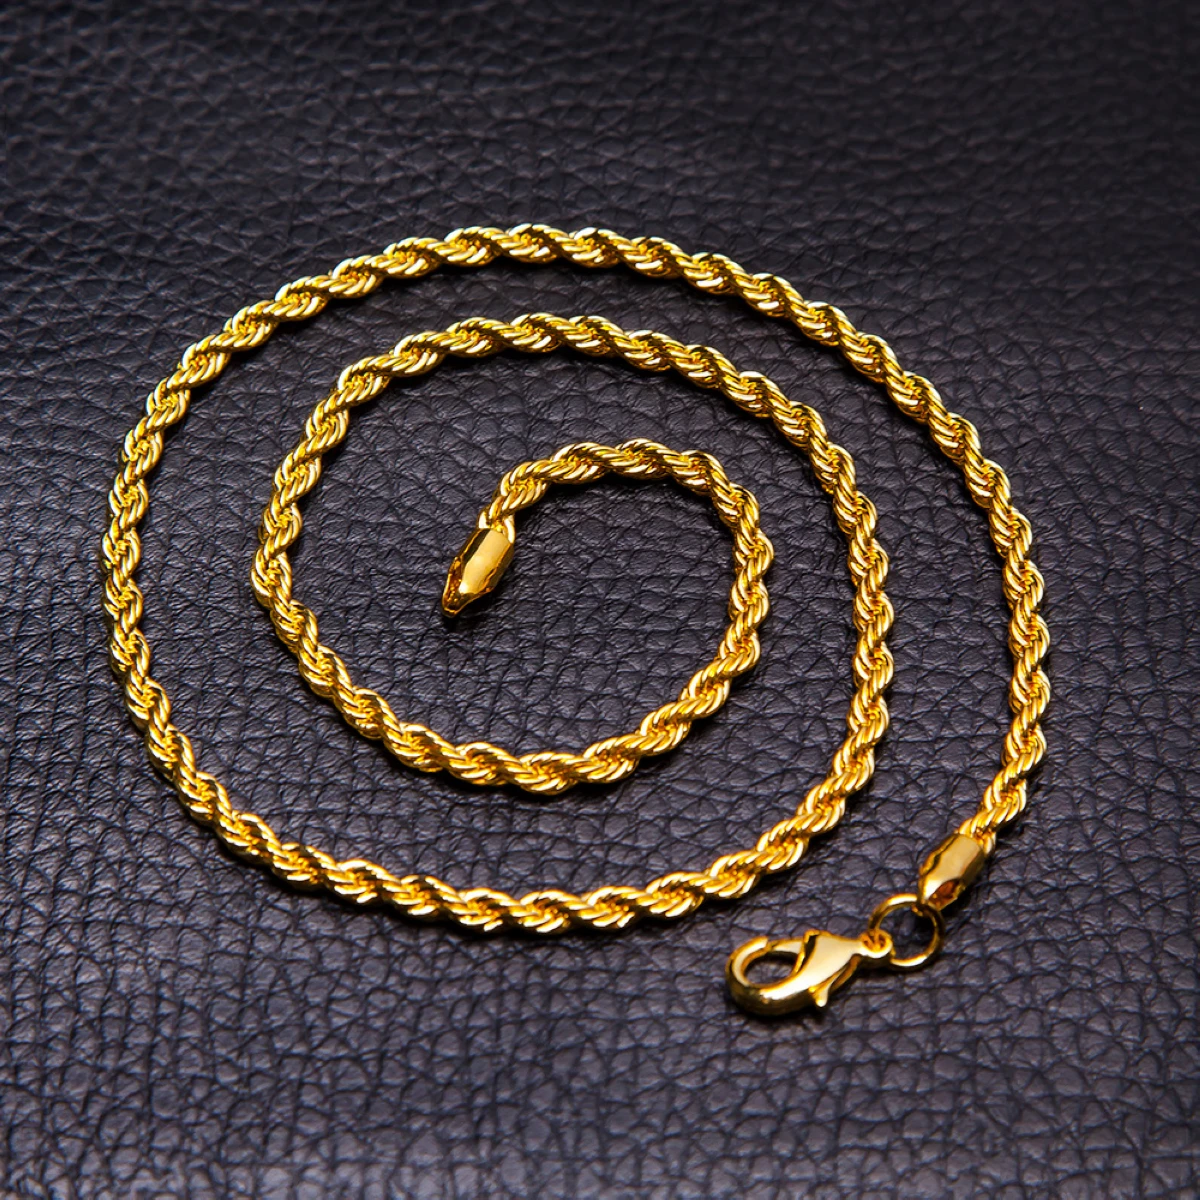 

Classic Unisex Chains Necklaces Shellhard Mens Gold Color Twisted Rope Necklace DIY Chain Jewelry cadenas para hombre 50cm